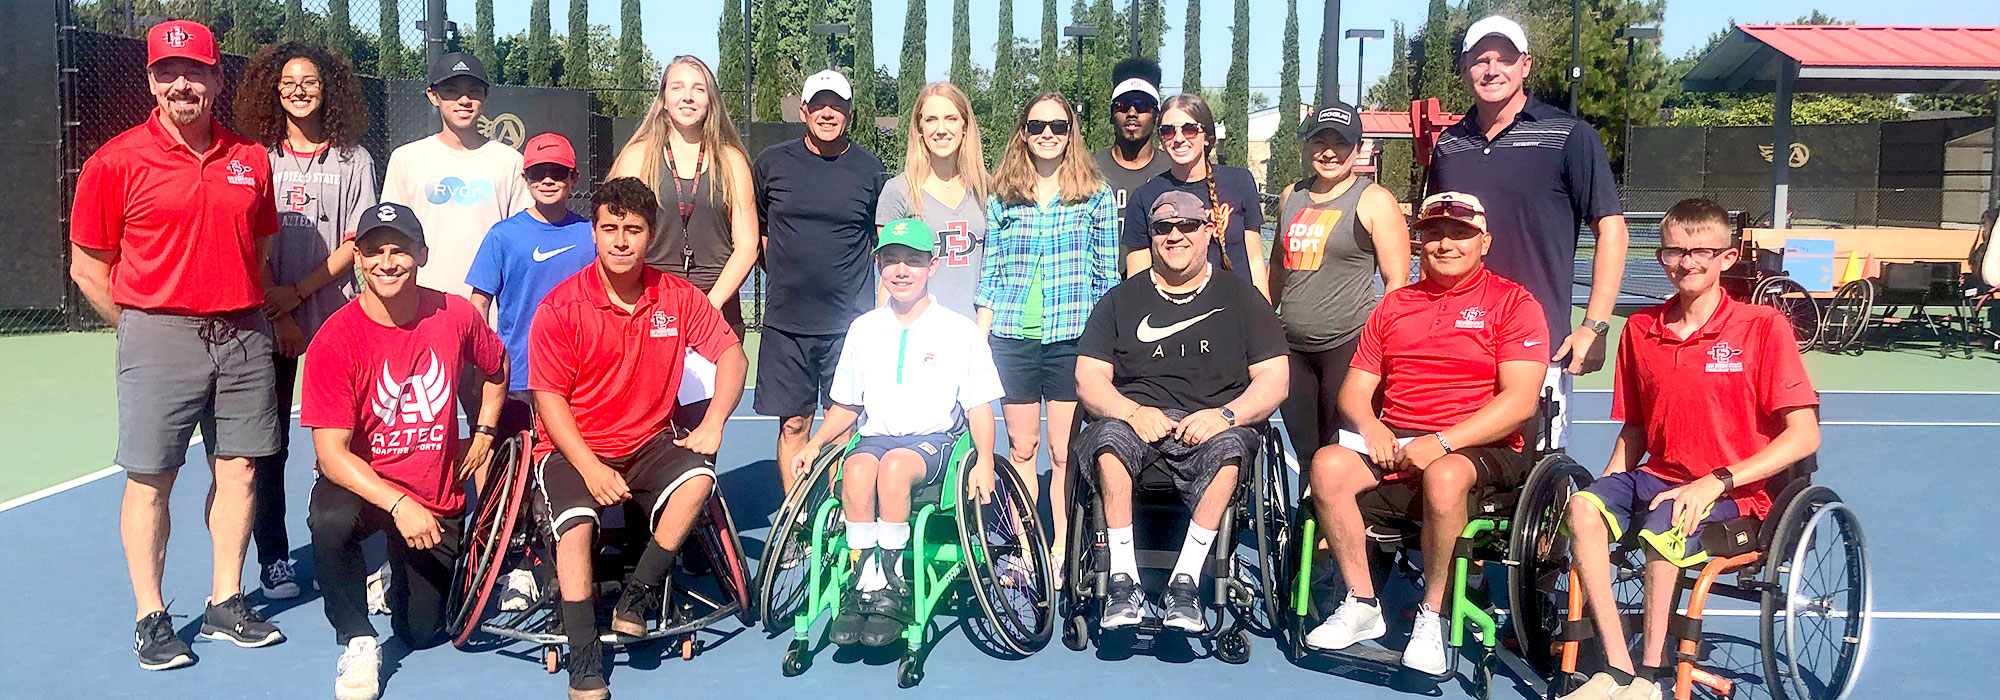 Group of Adapted Athletics Partners/Coaches/Staff/Athletes on tennis court